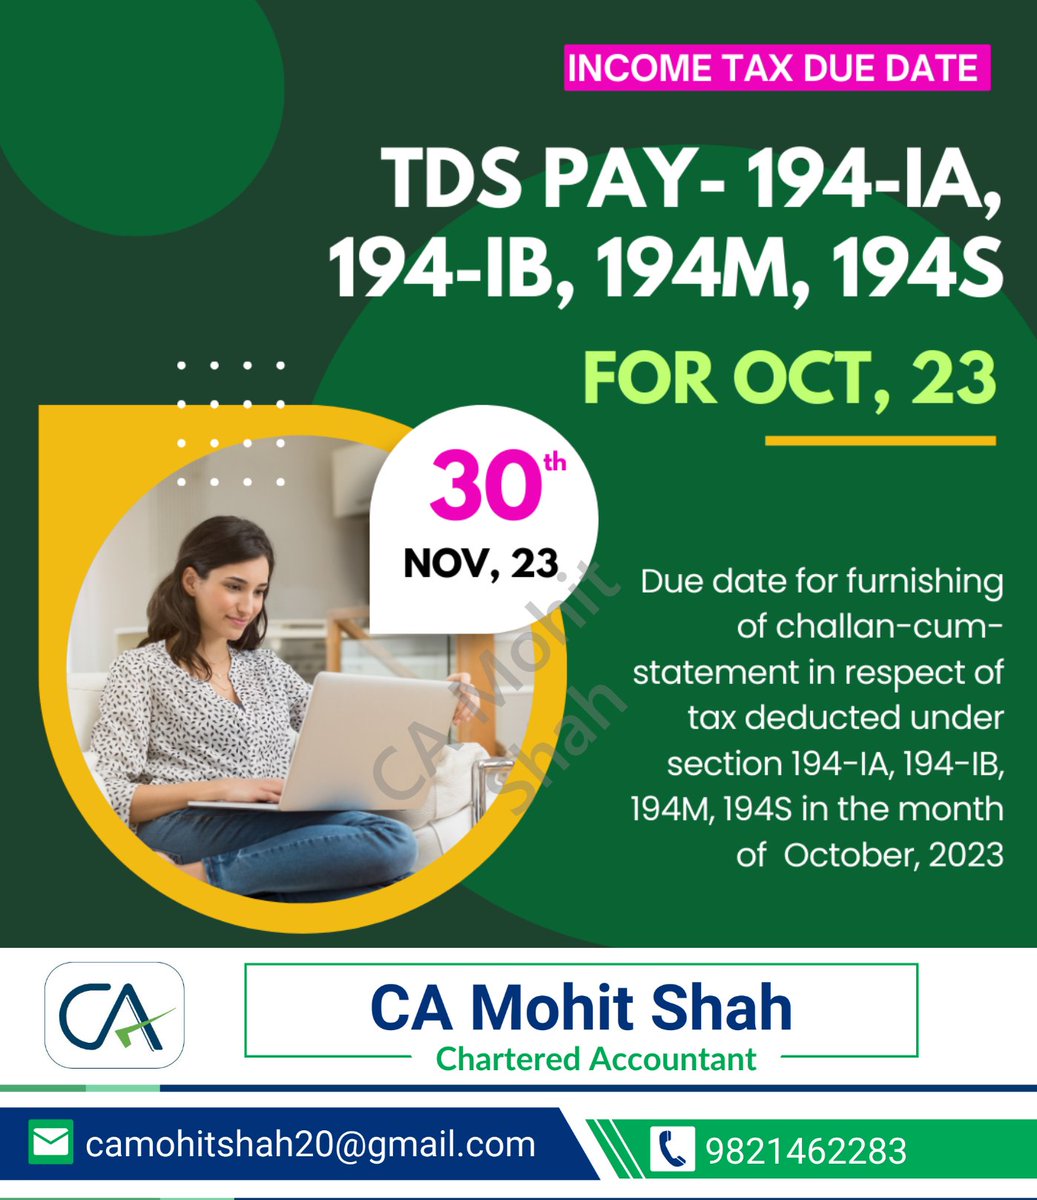 Don't forget to furnish your challan-cum-statement for tax deducted in October 2023. Let's all be responsible taxpayers 

#TDS #TaxDeduction #TDSPayment #IncomeTax #TaxCompliance #FinancialManagement #194IA #194IB #194M #194S